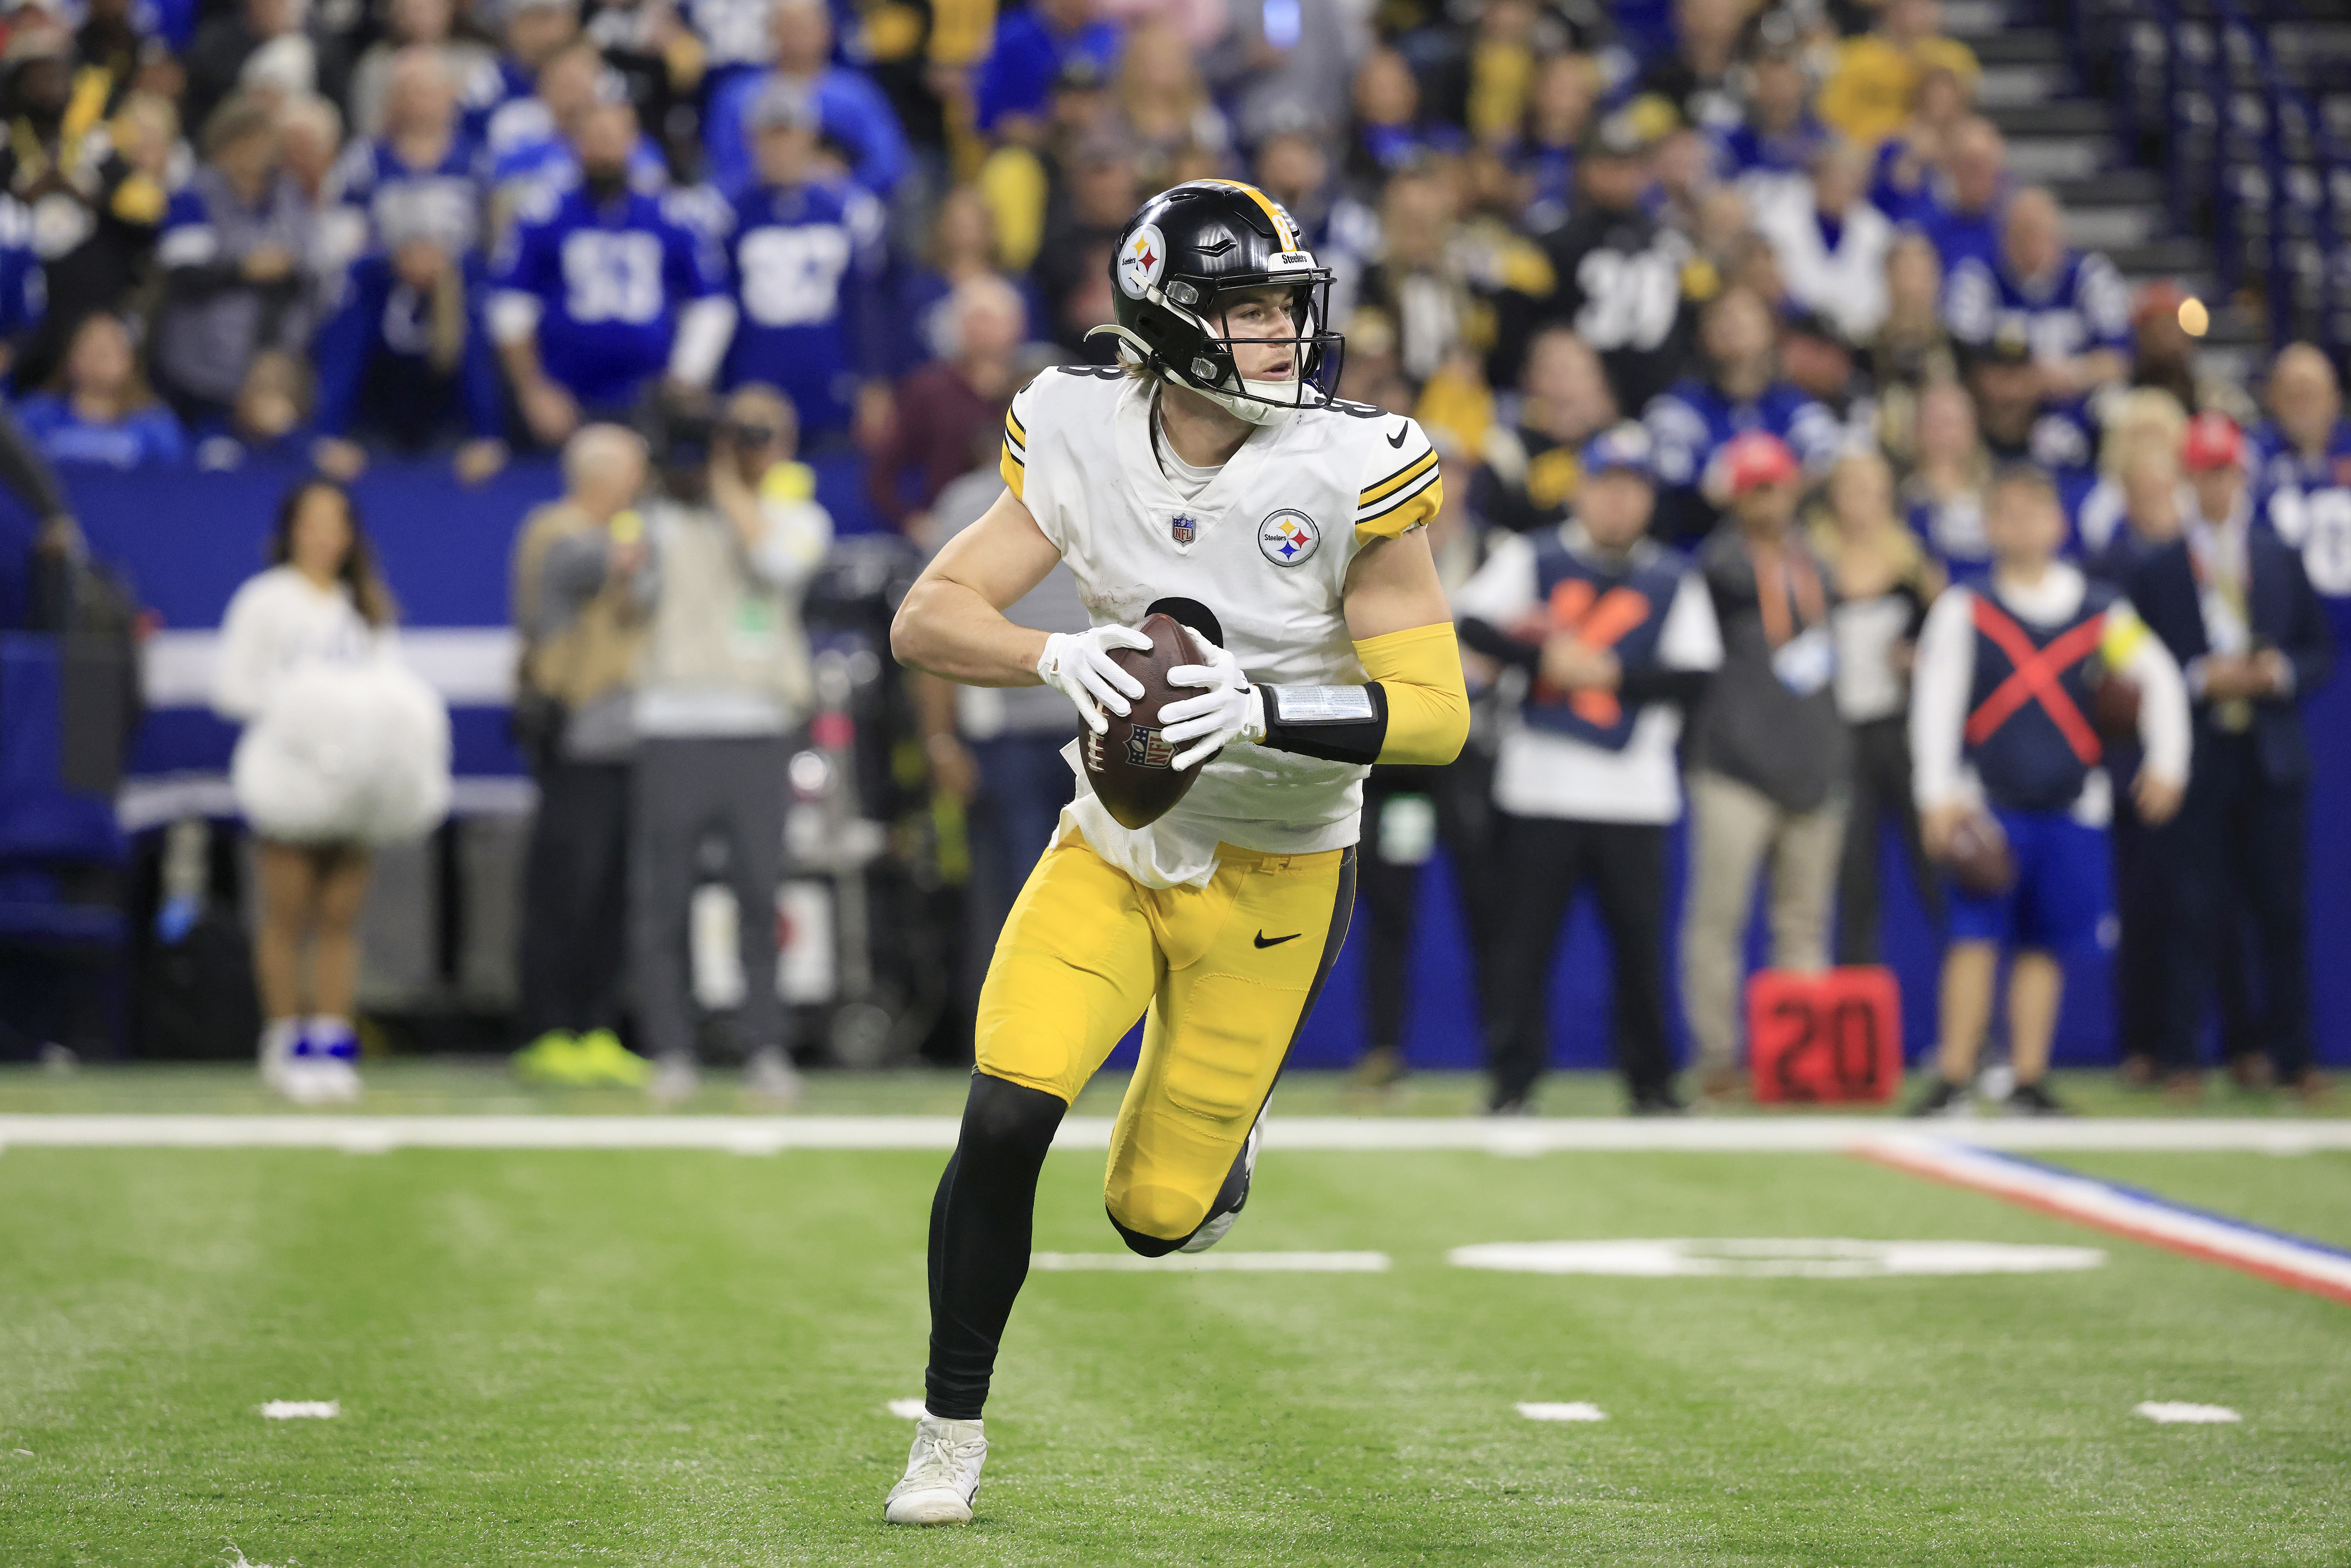 Kaboly: Kenny Pickett, Steelers' offense earned more than just a TD with 1  drive - The Athletic